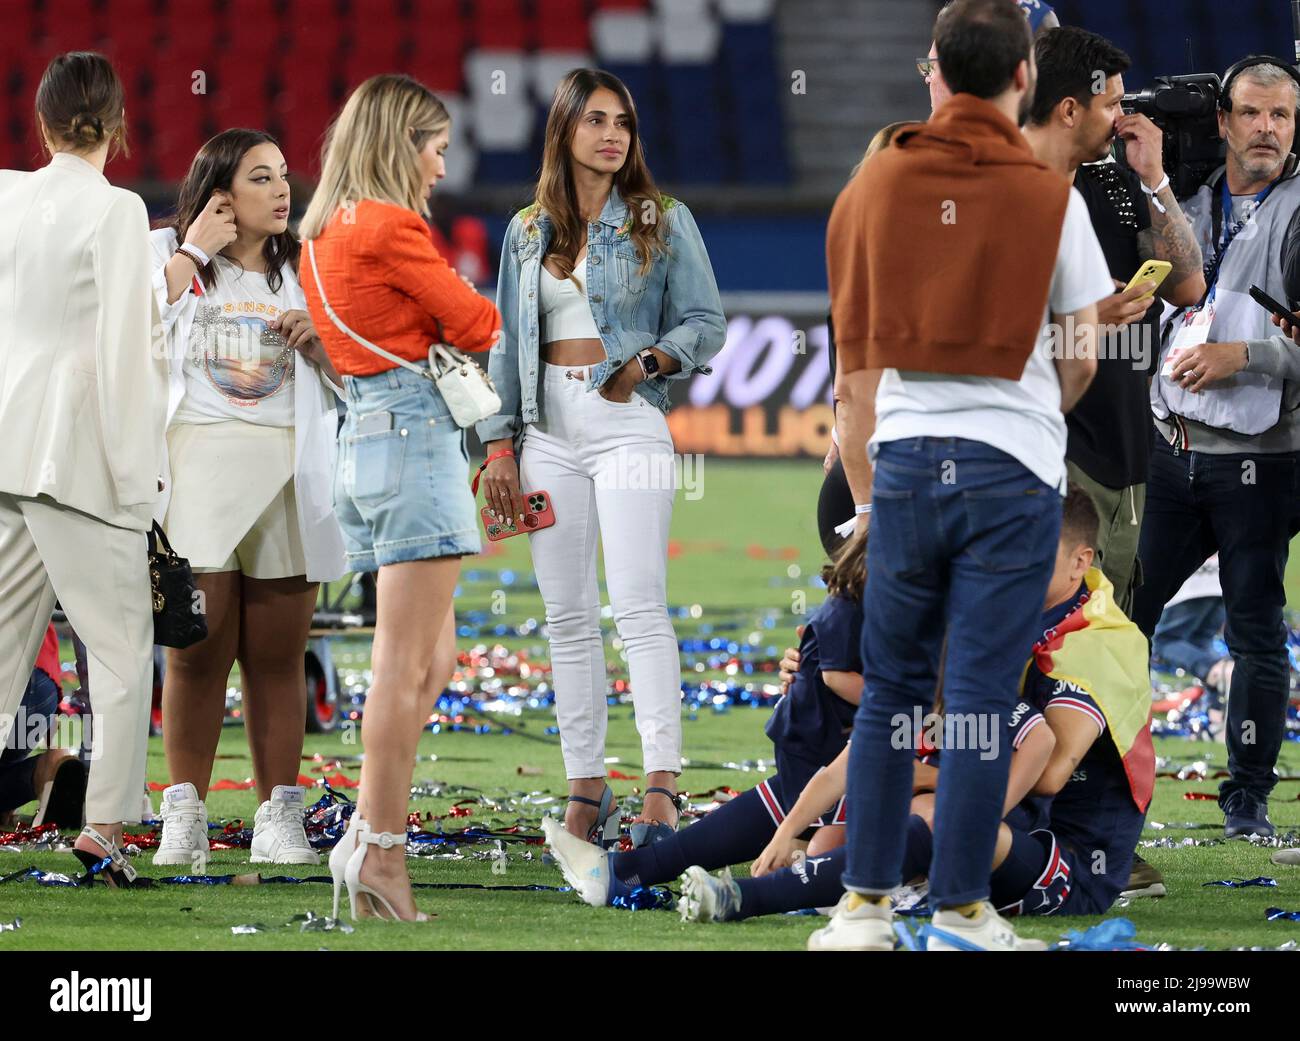 Antonella Roccuzzo, wife of Lionel Messi of PSG, following the Ligue 1 Trophy Ceremony following the French championship Ligue 1 football match between Paris Saint-Germain (PSG) and FC Metz on May image photo